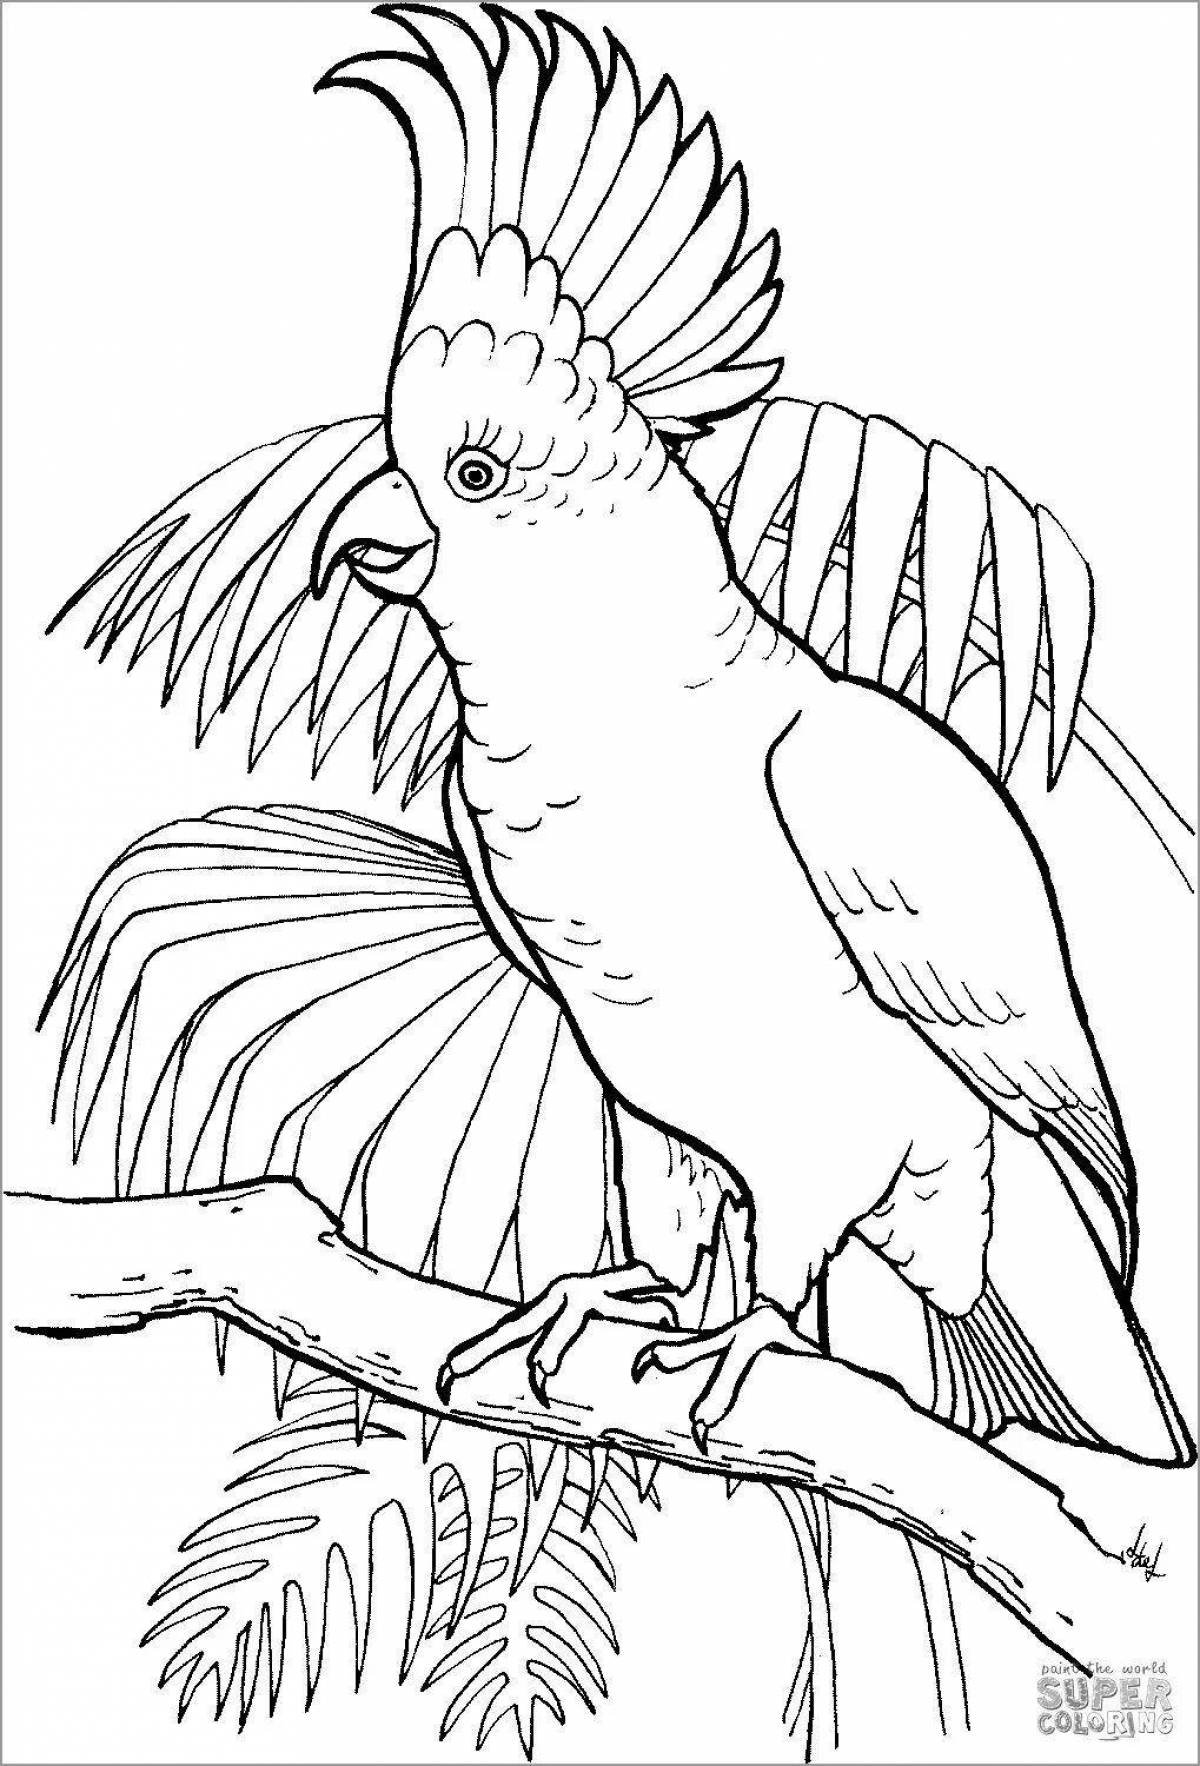 Parrot deluxe coloring book